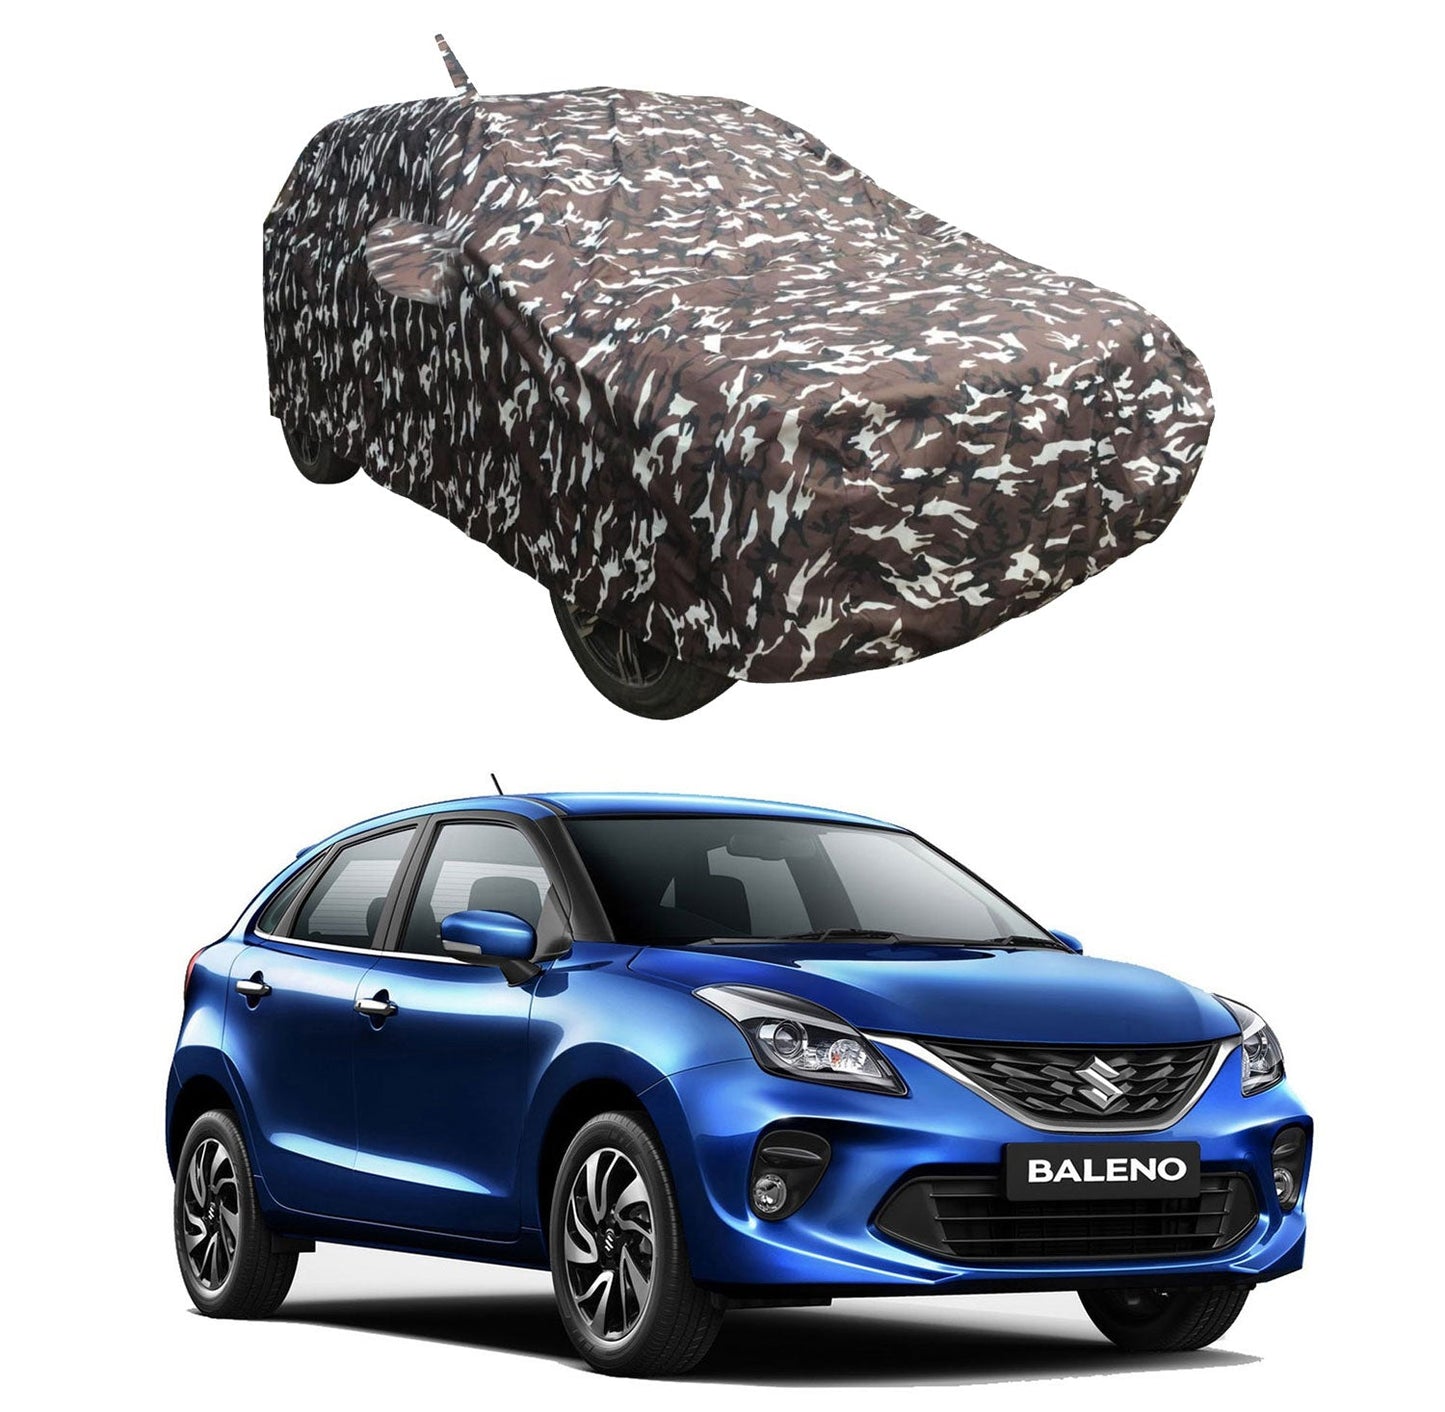 Oshotto Ranger Design Made of 100% Waterproof Fabric Car Body Cover with Mirror Pocket For Maruti Suzuki Baleno 2015-2019 (with Antenna Pocket)